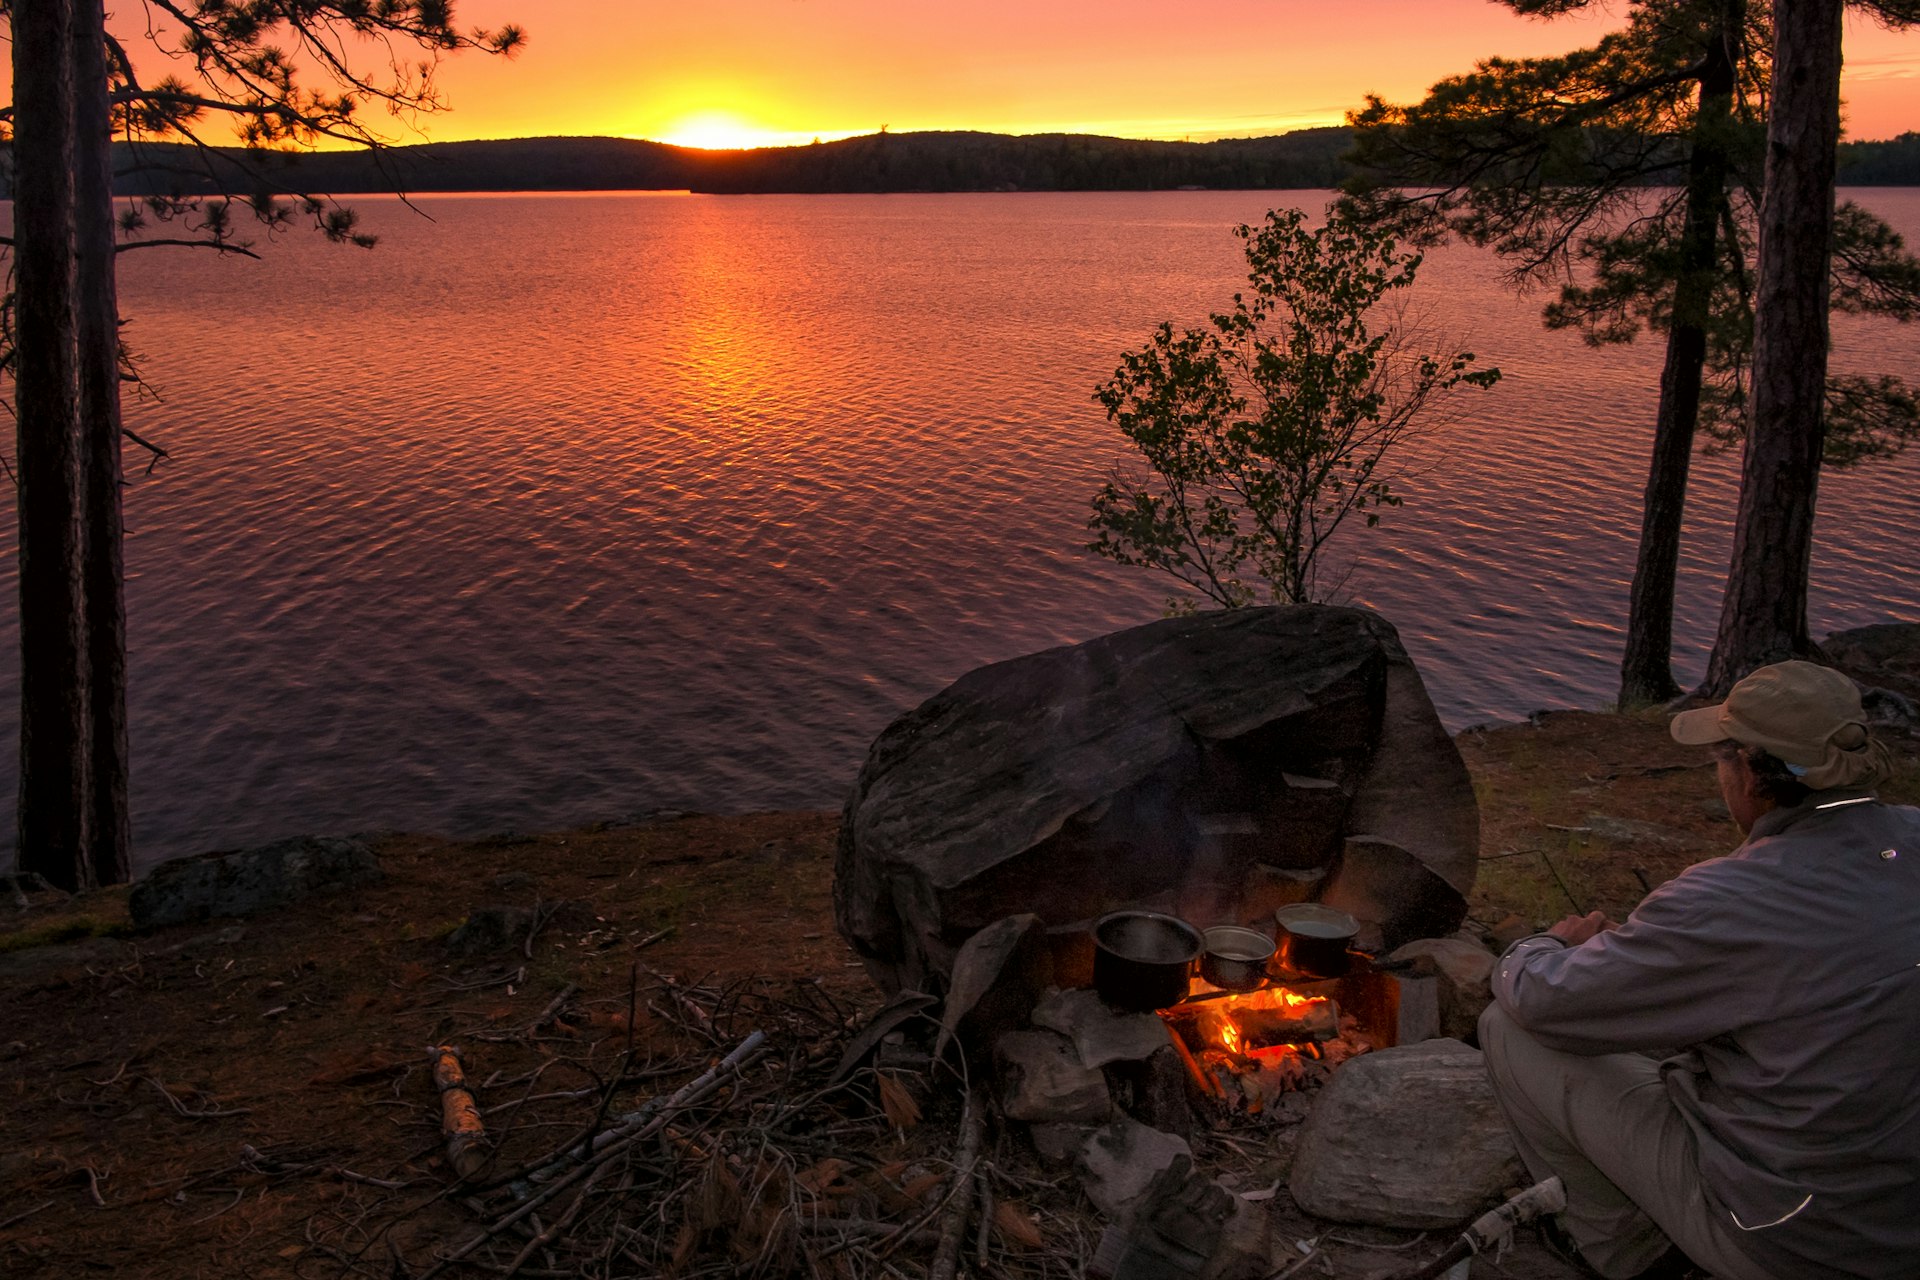 Campfire dinner at sunset on Opeongo Lake, Algonquin Provincial Park